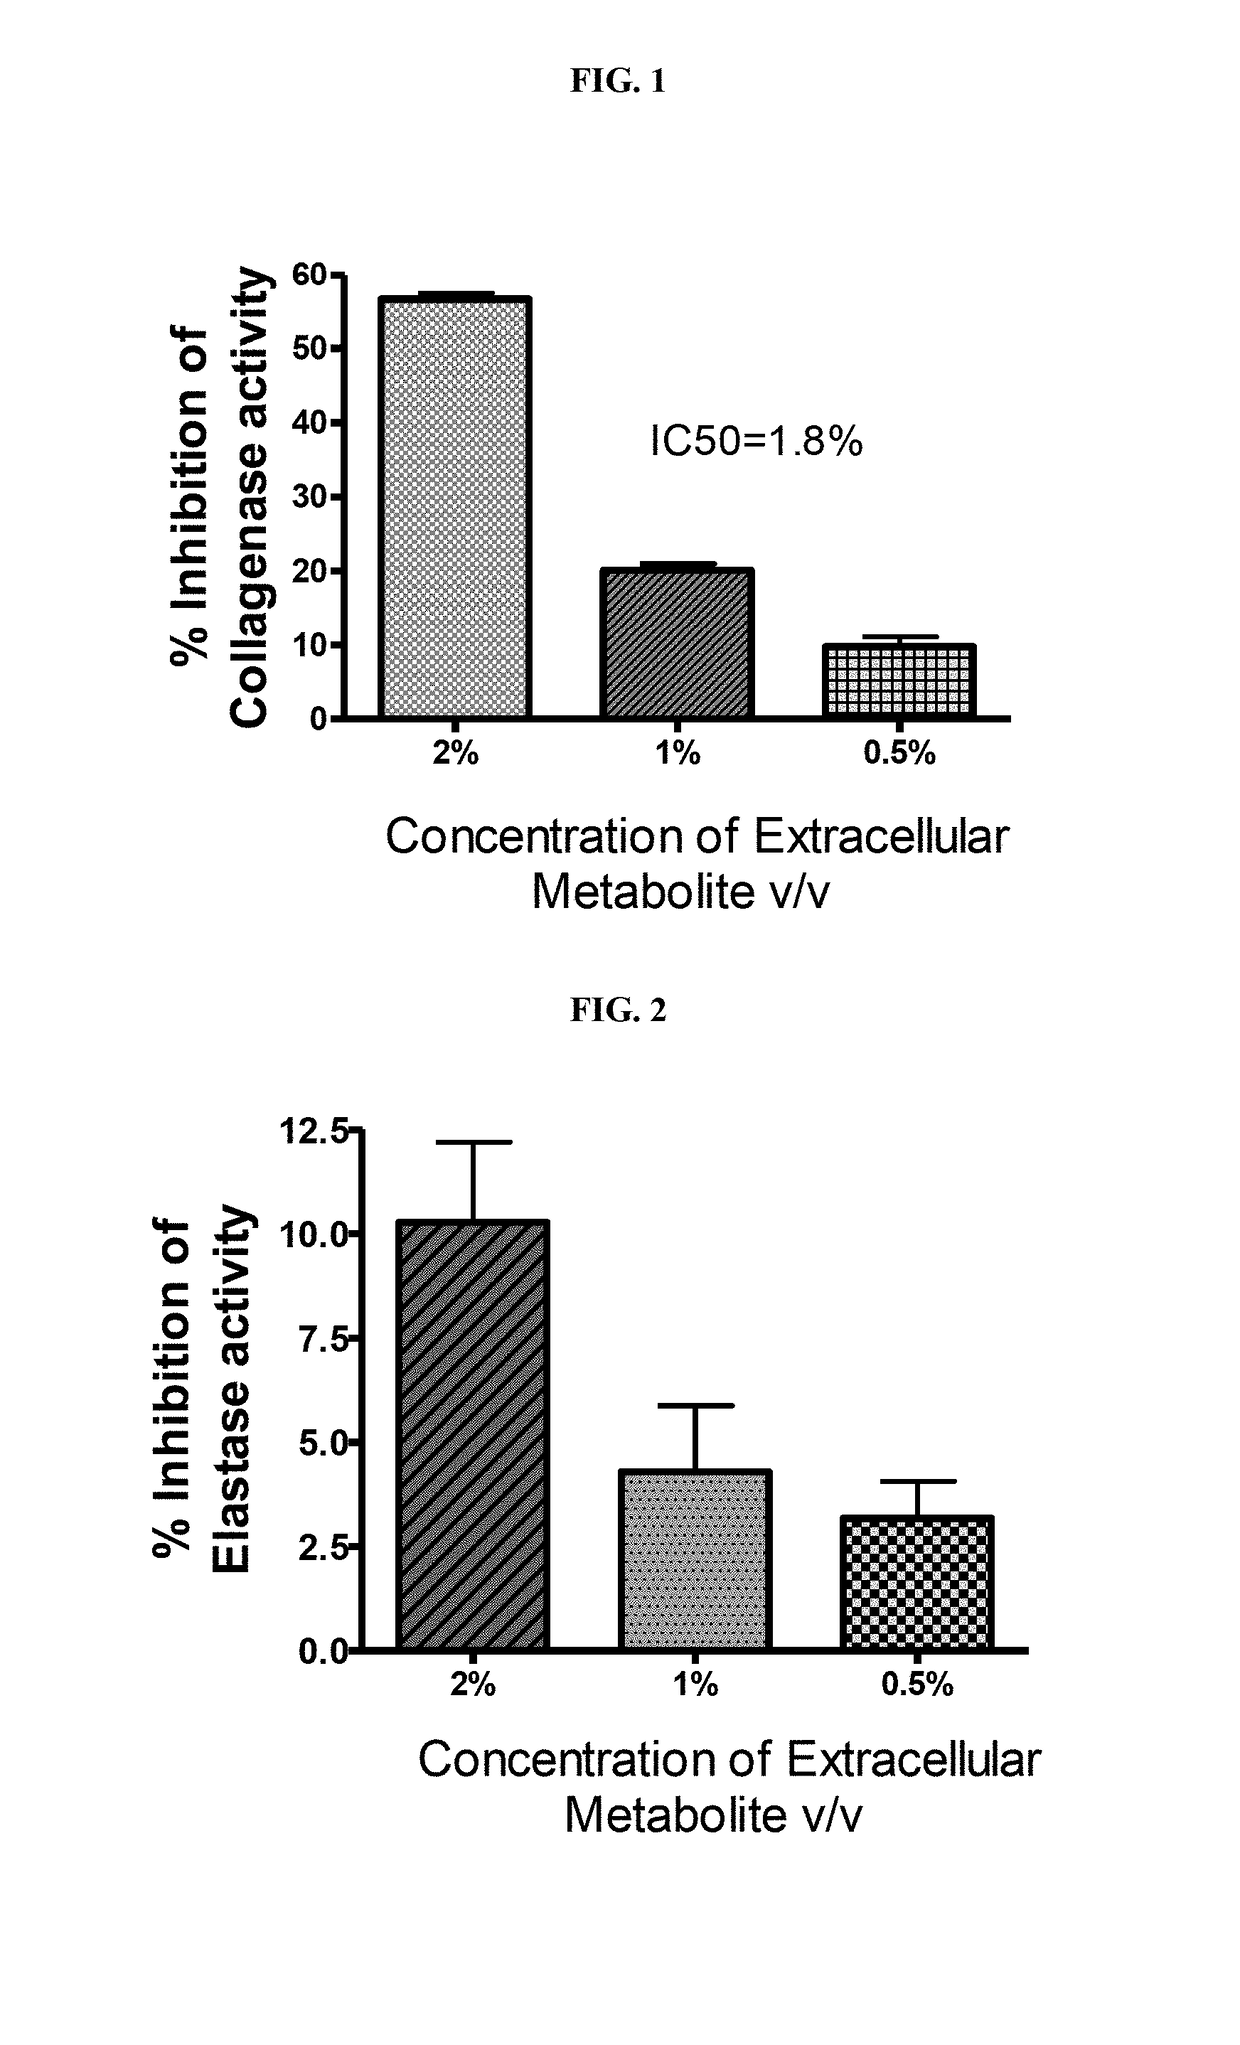 Anti-aging potential of extracellular metabolite isolated from bacillus coagulans mtcc 5856